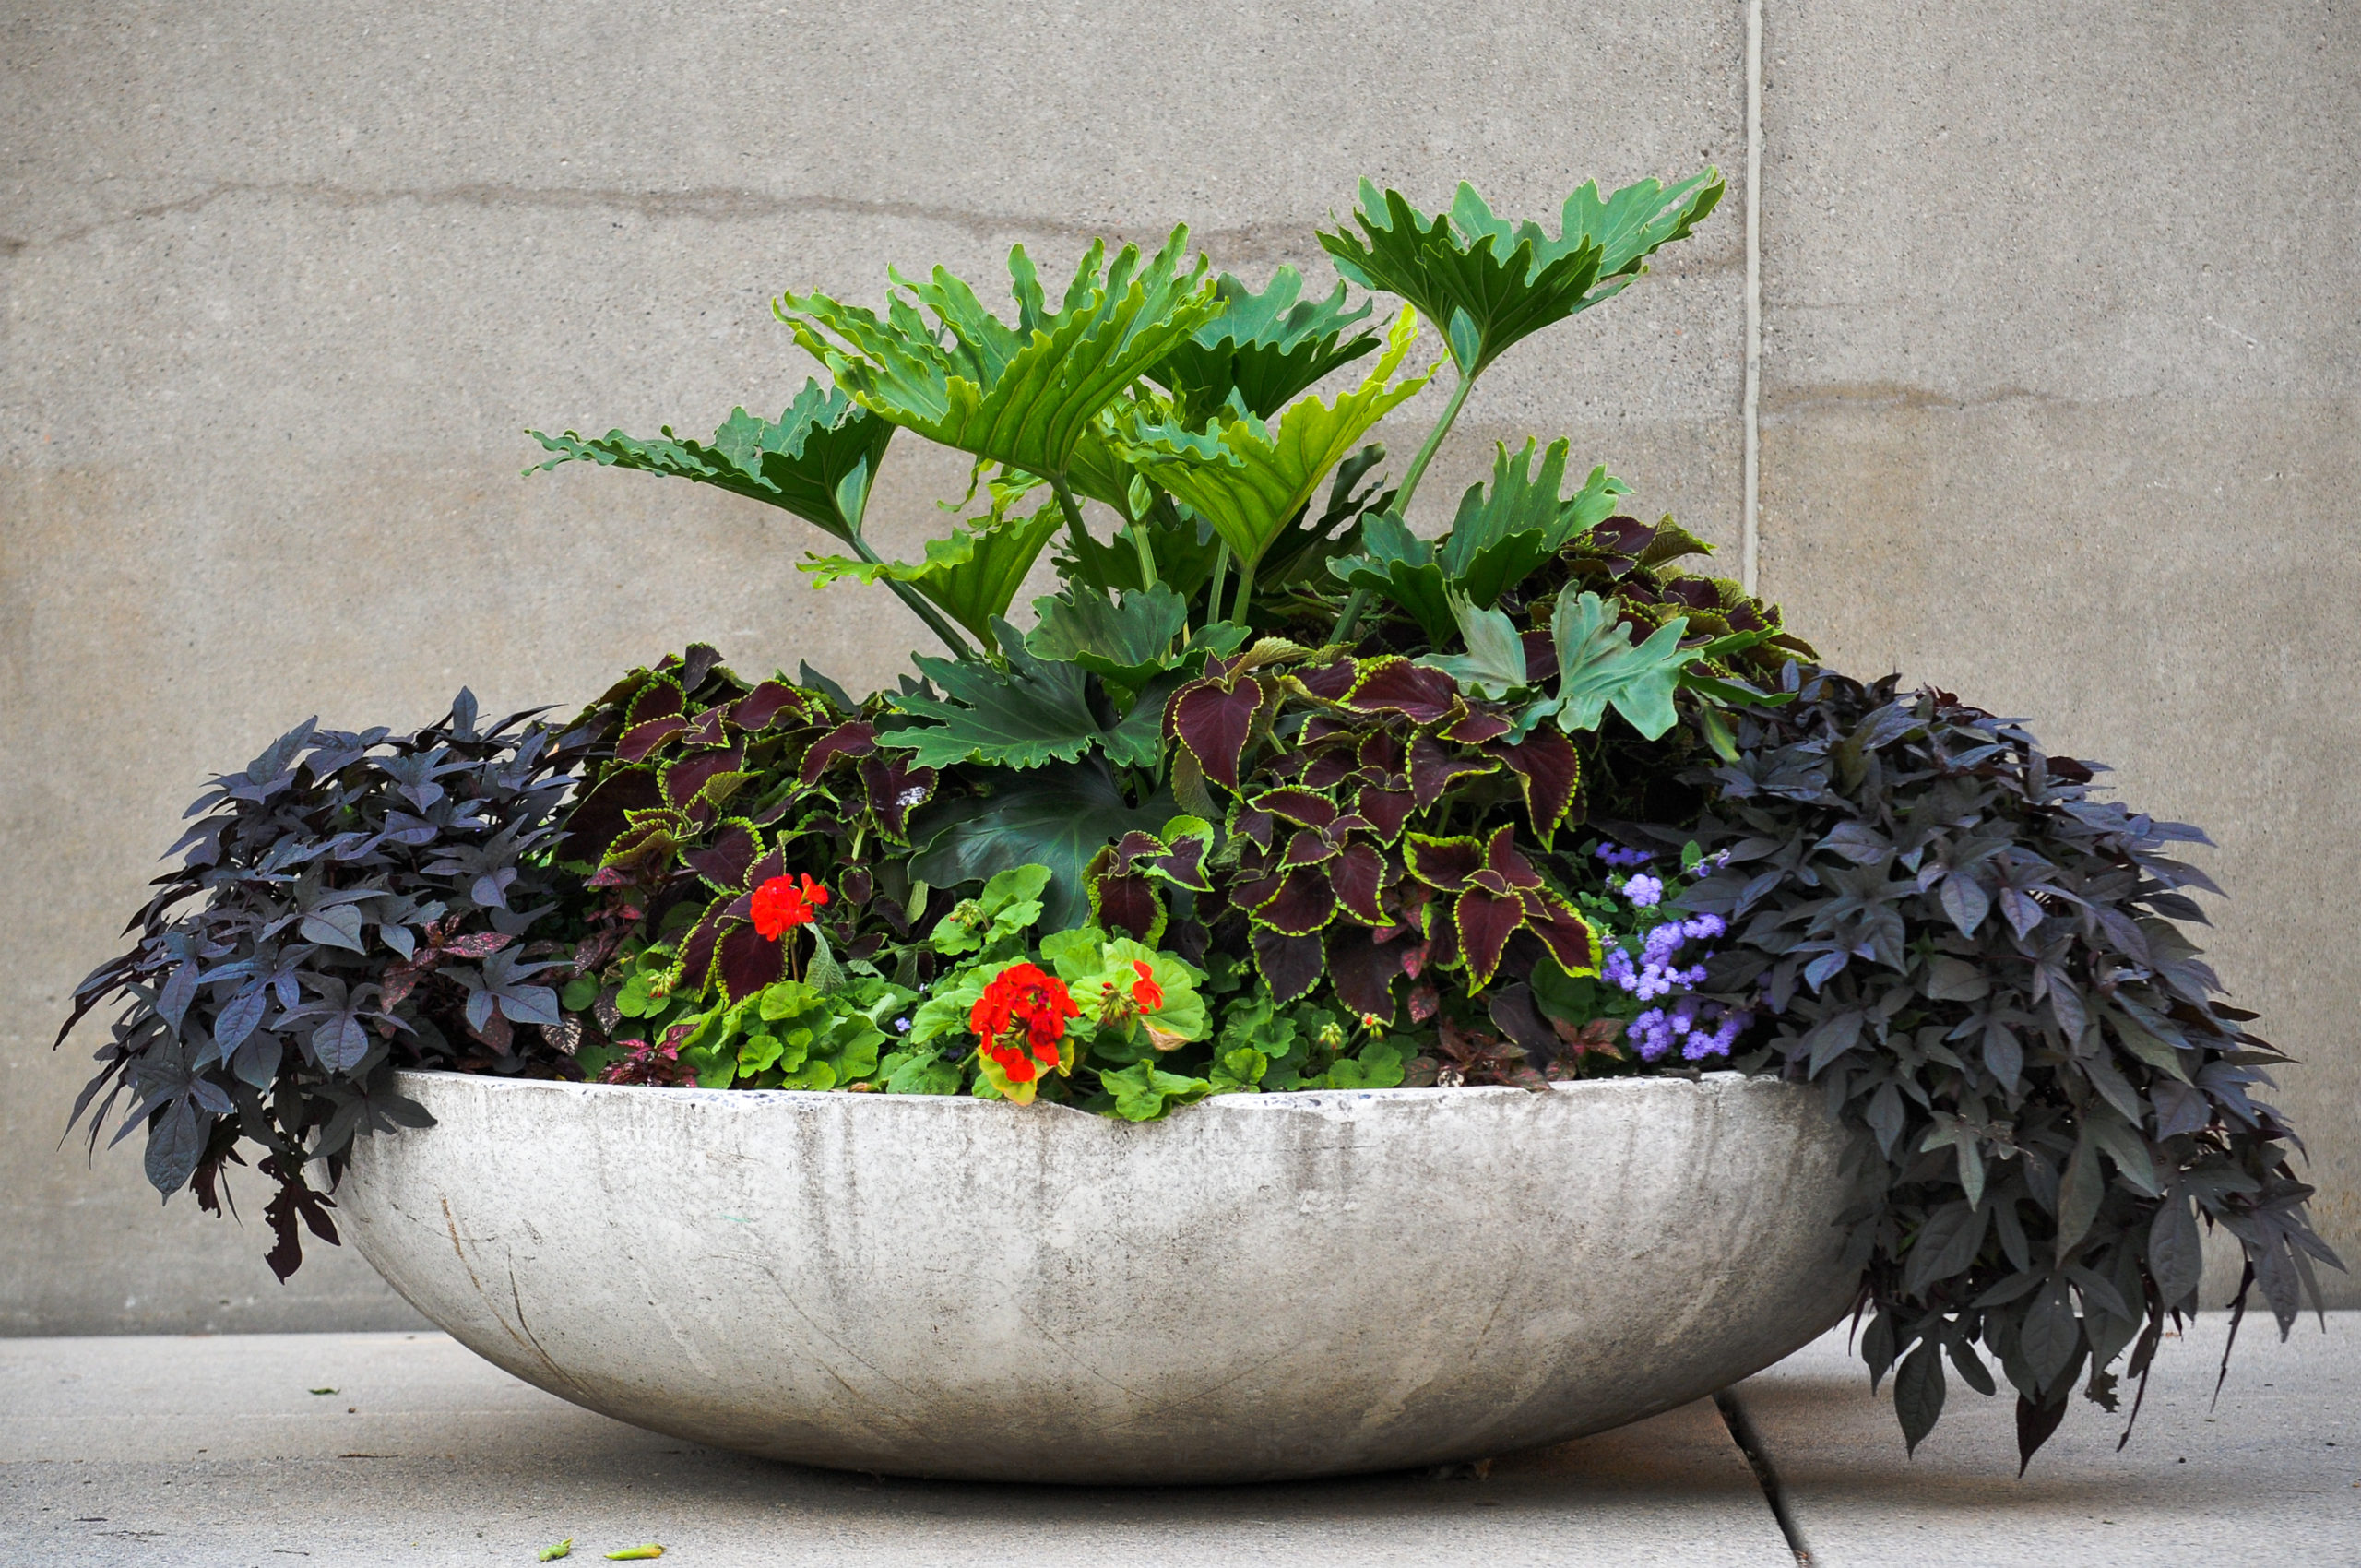 An overflowing modern arrangement of plants in a large modern concrete container.